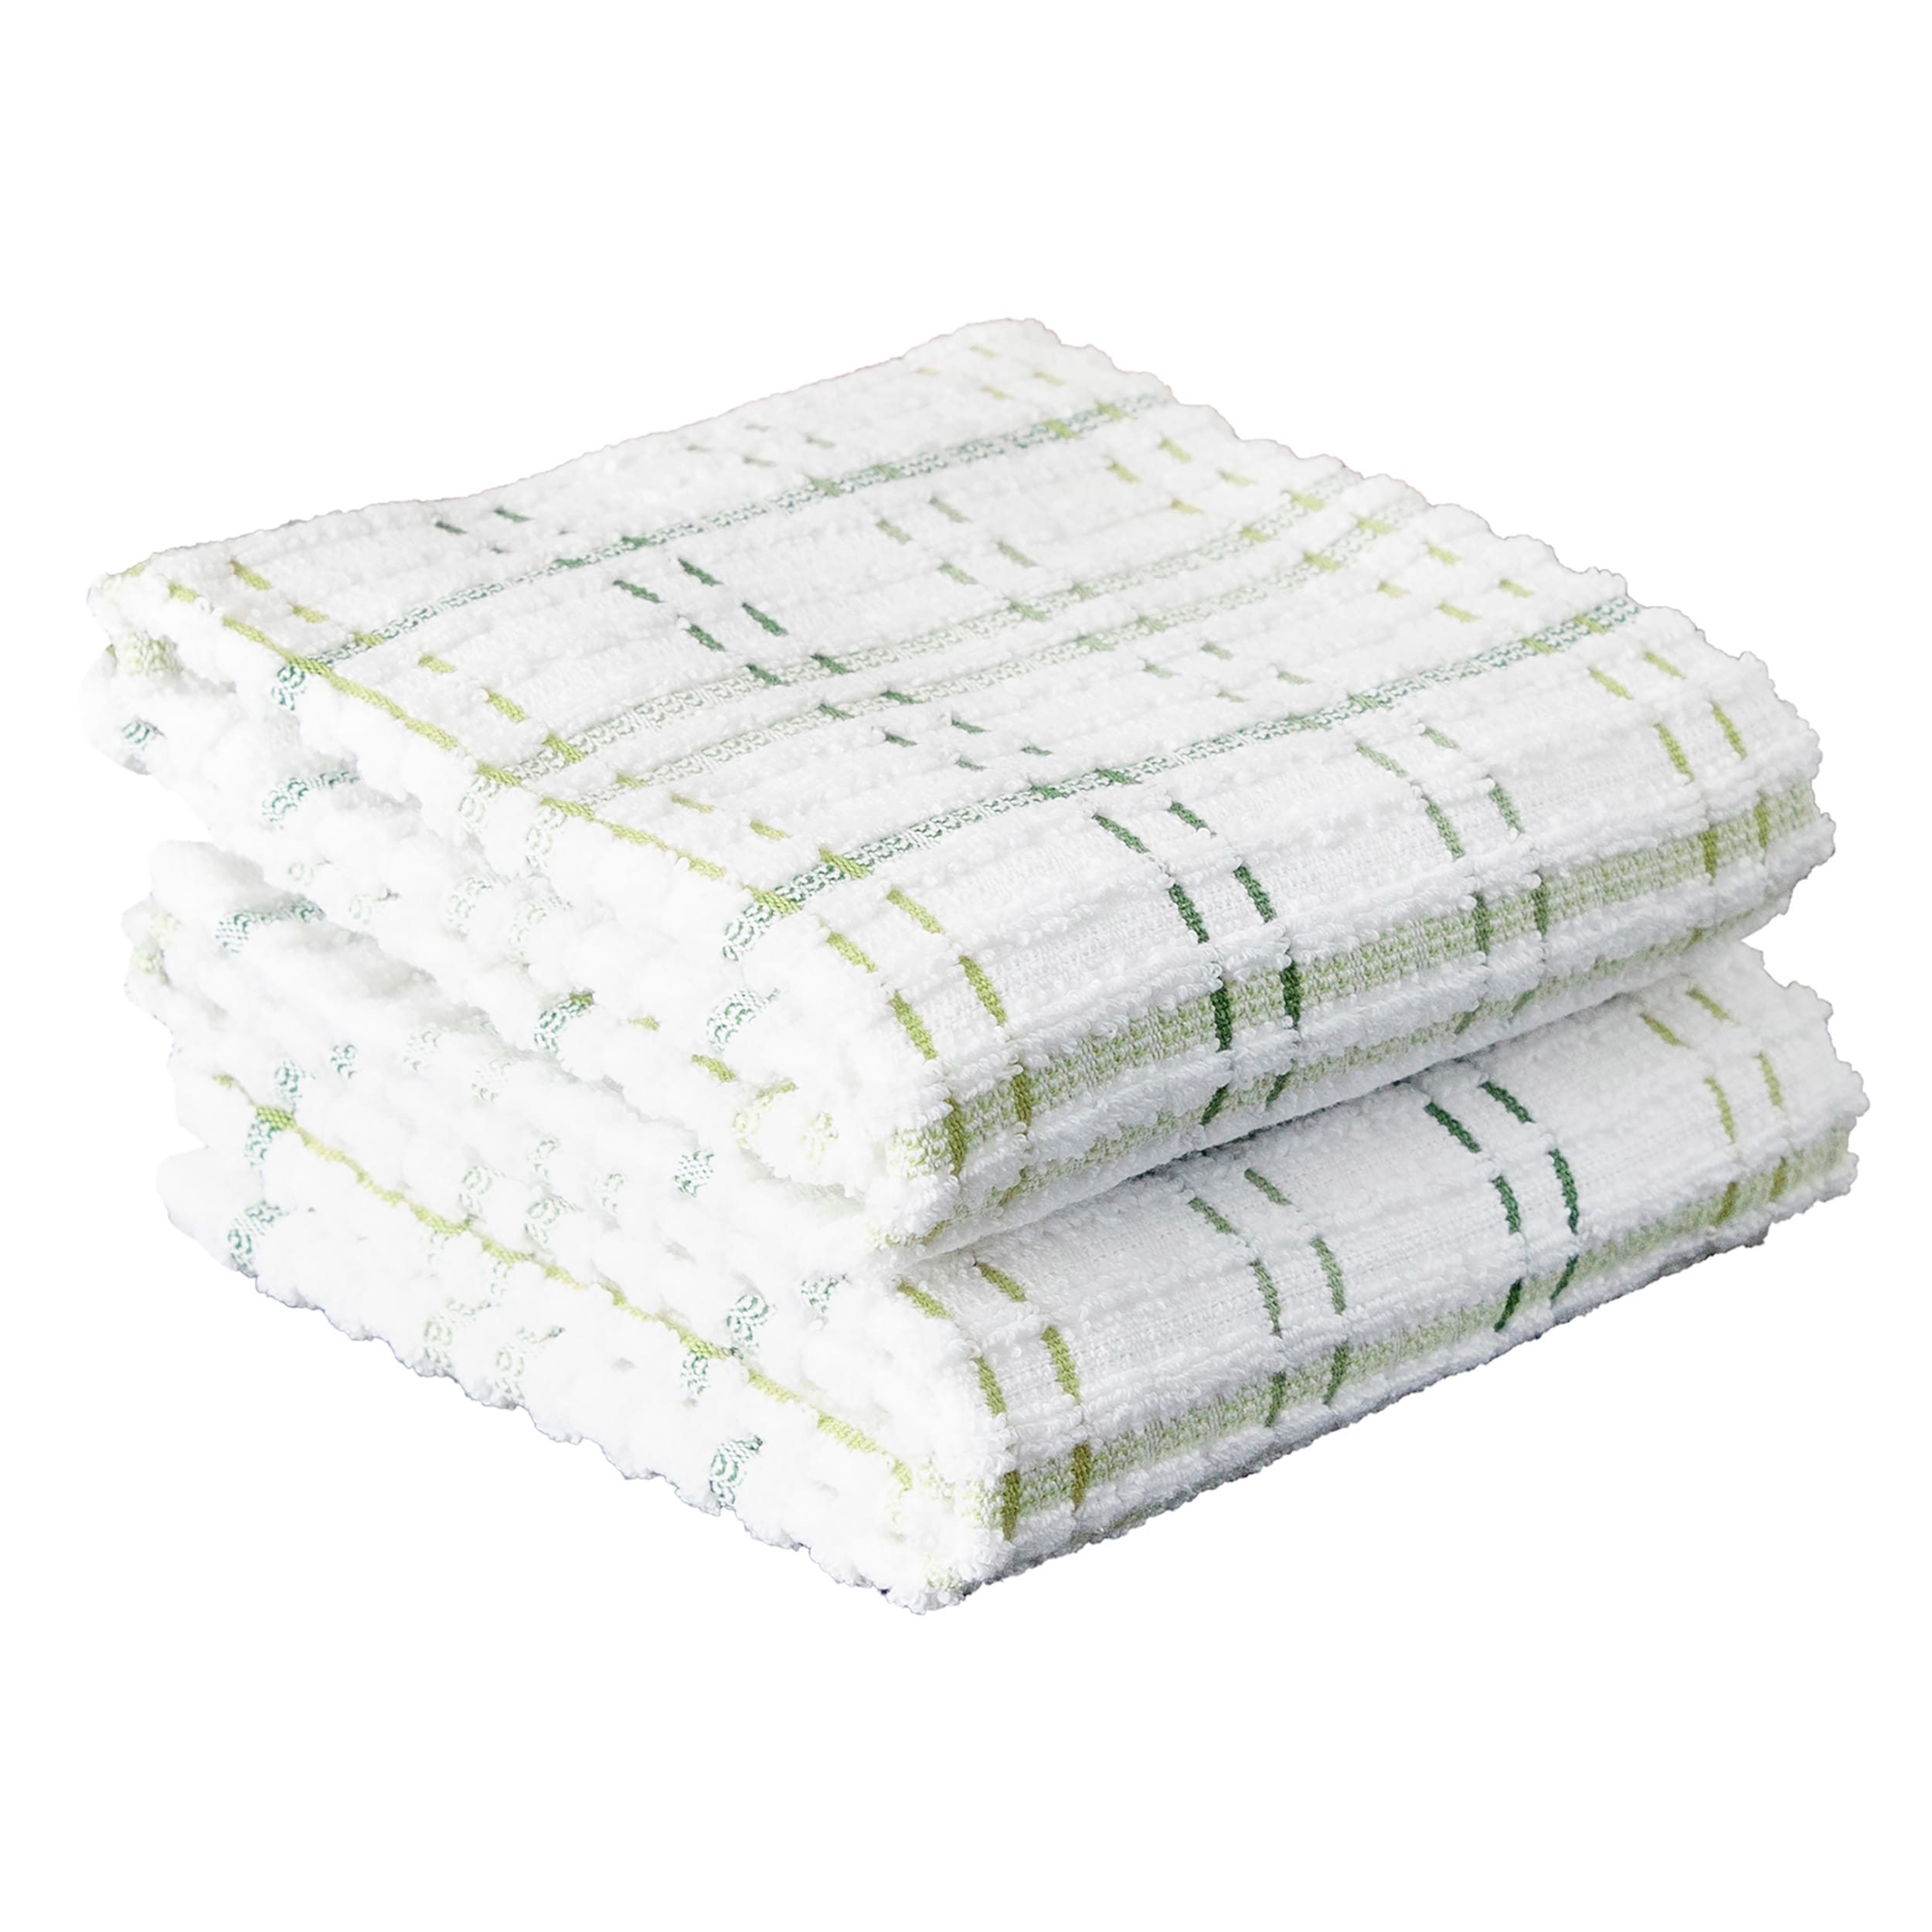 T-fal Green Plaid Solid and Check Parquet Woven Cotton Kitchen